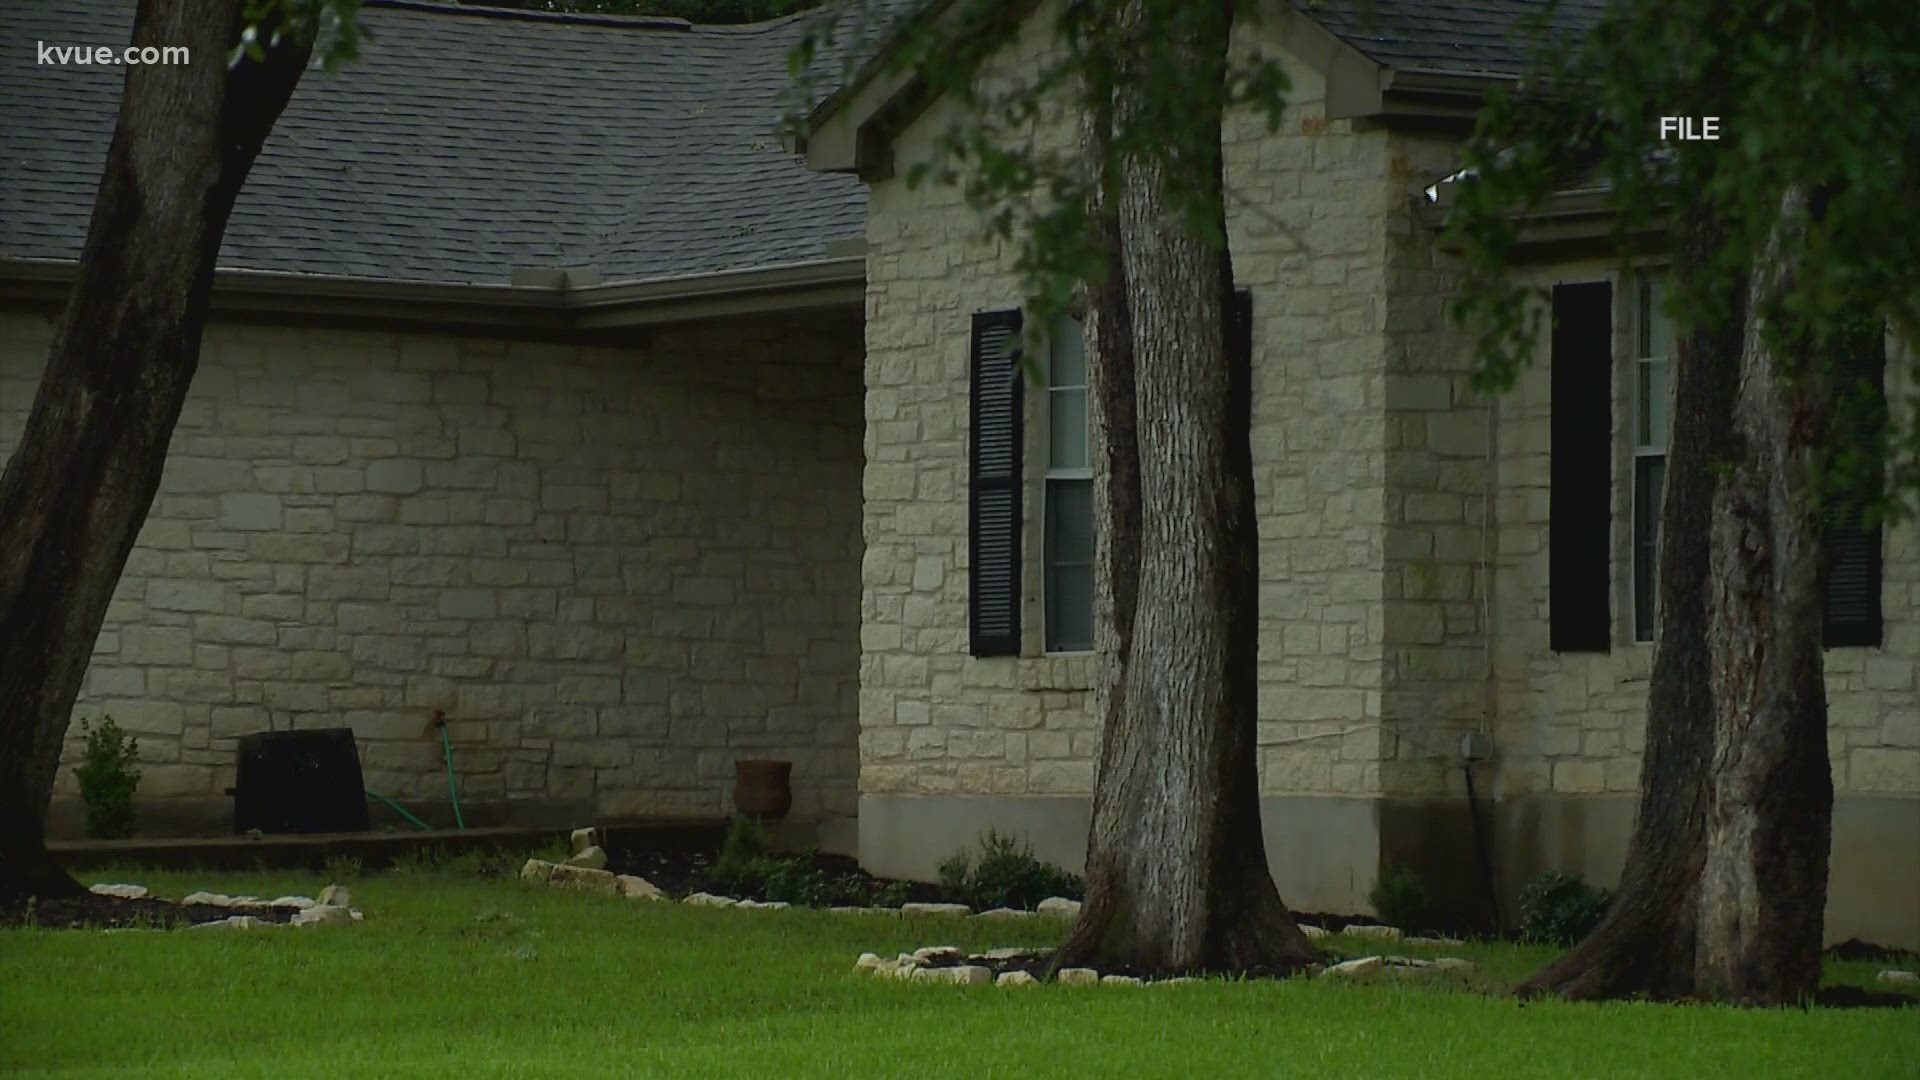 Property tax protest deadline approaching for Central Texas counties